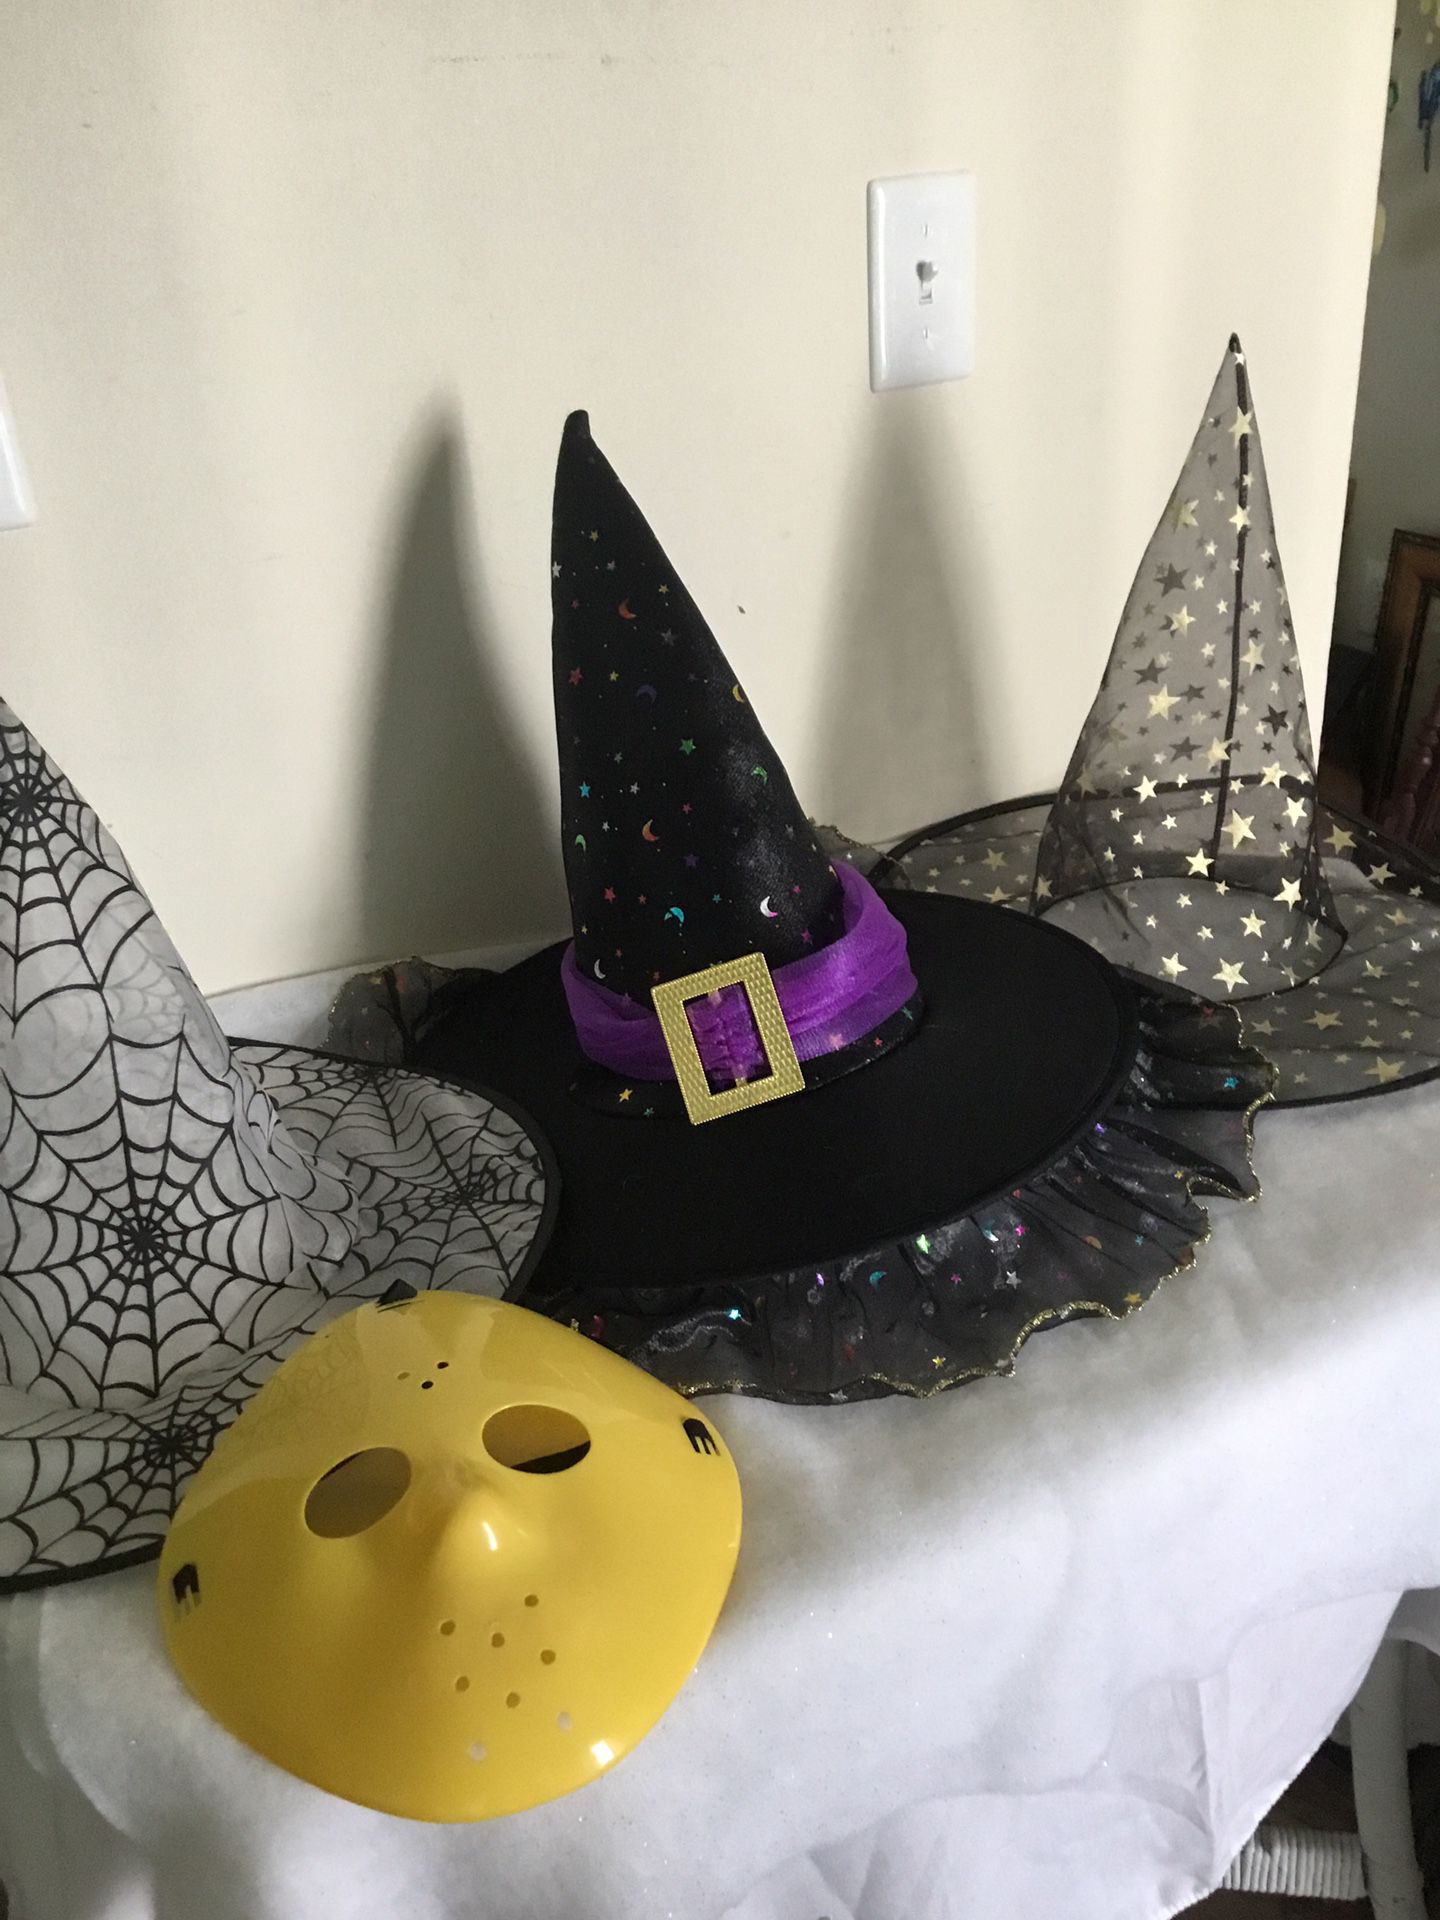 Three Halloween witches hats and one plastic scary mask